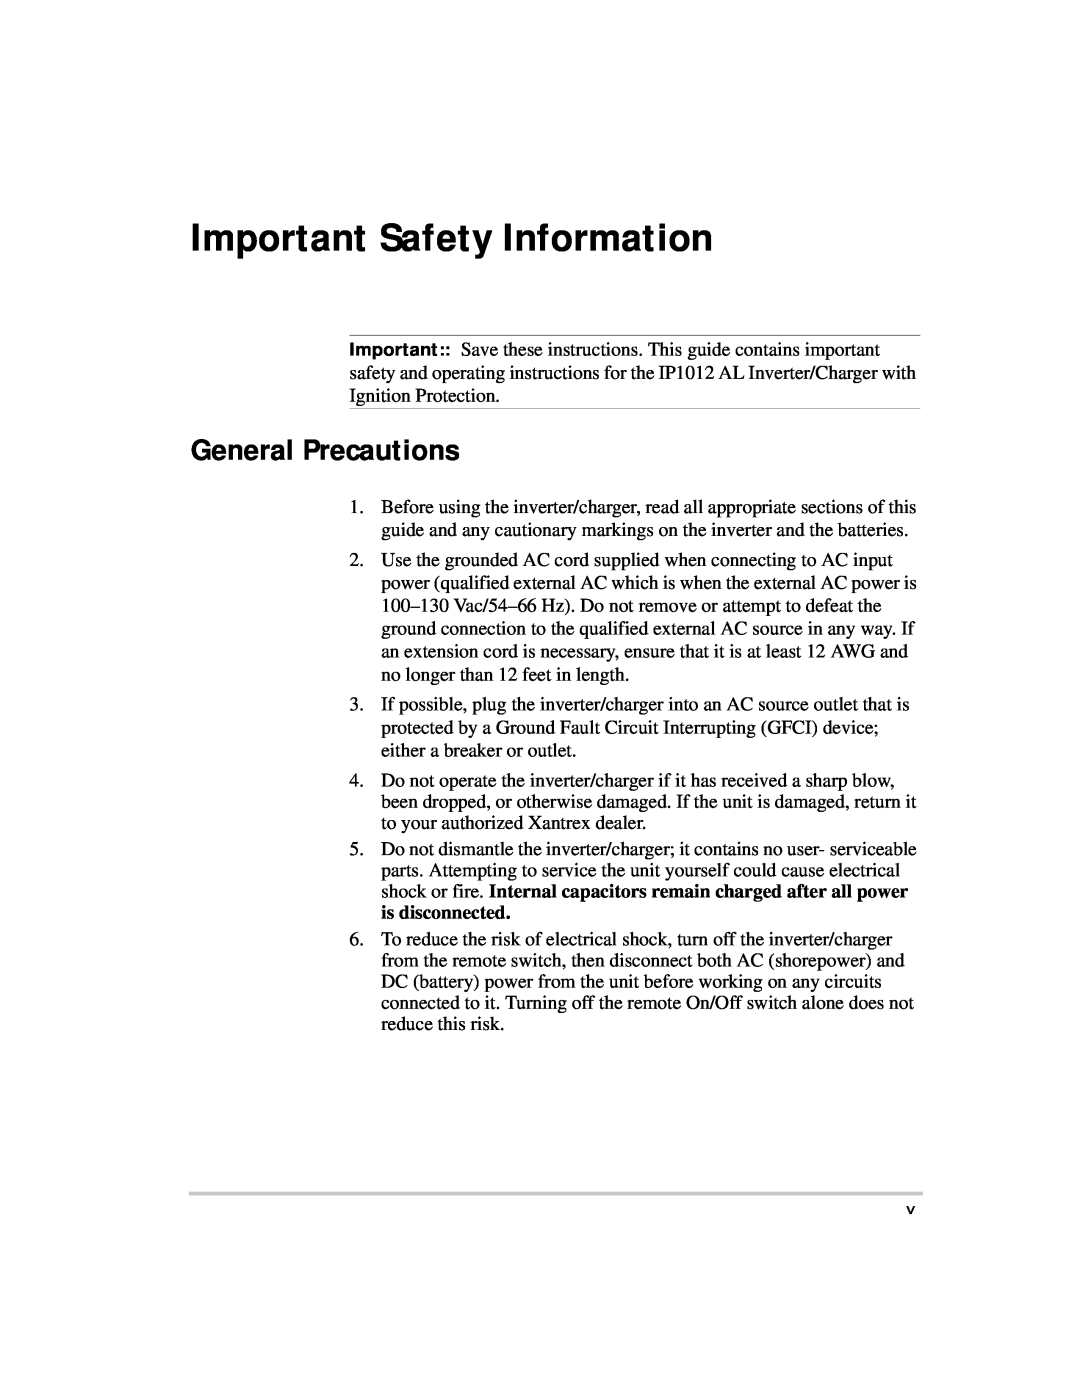 Xantrex Technology IP1012 AL manual Important Safety Information, General Precautions 